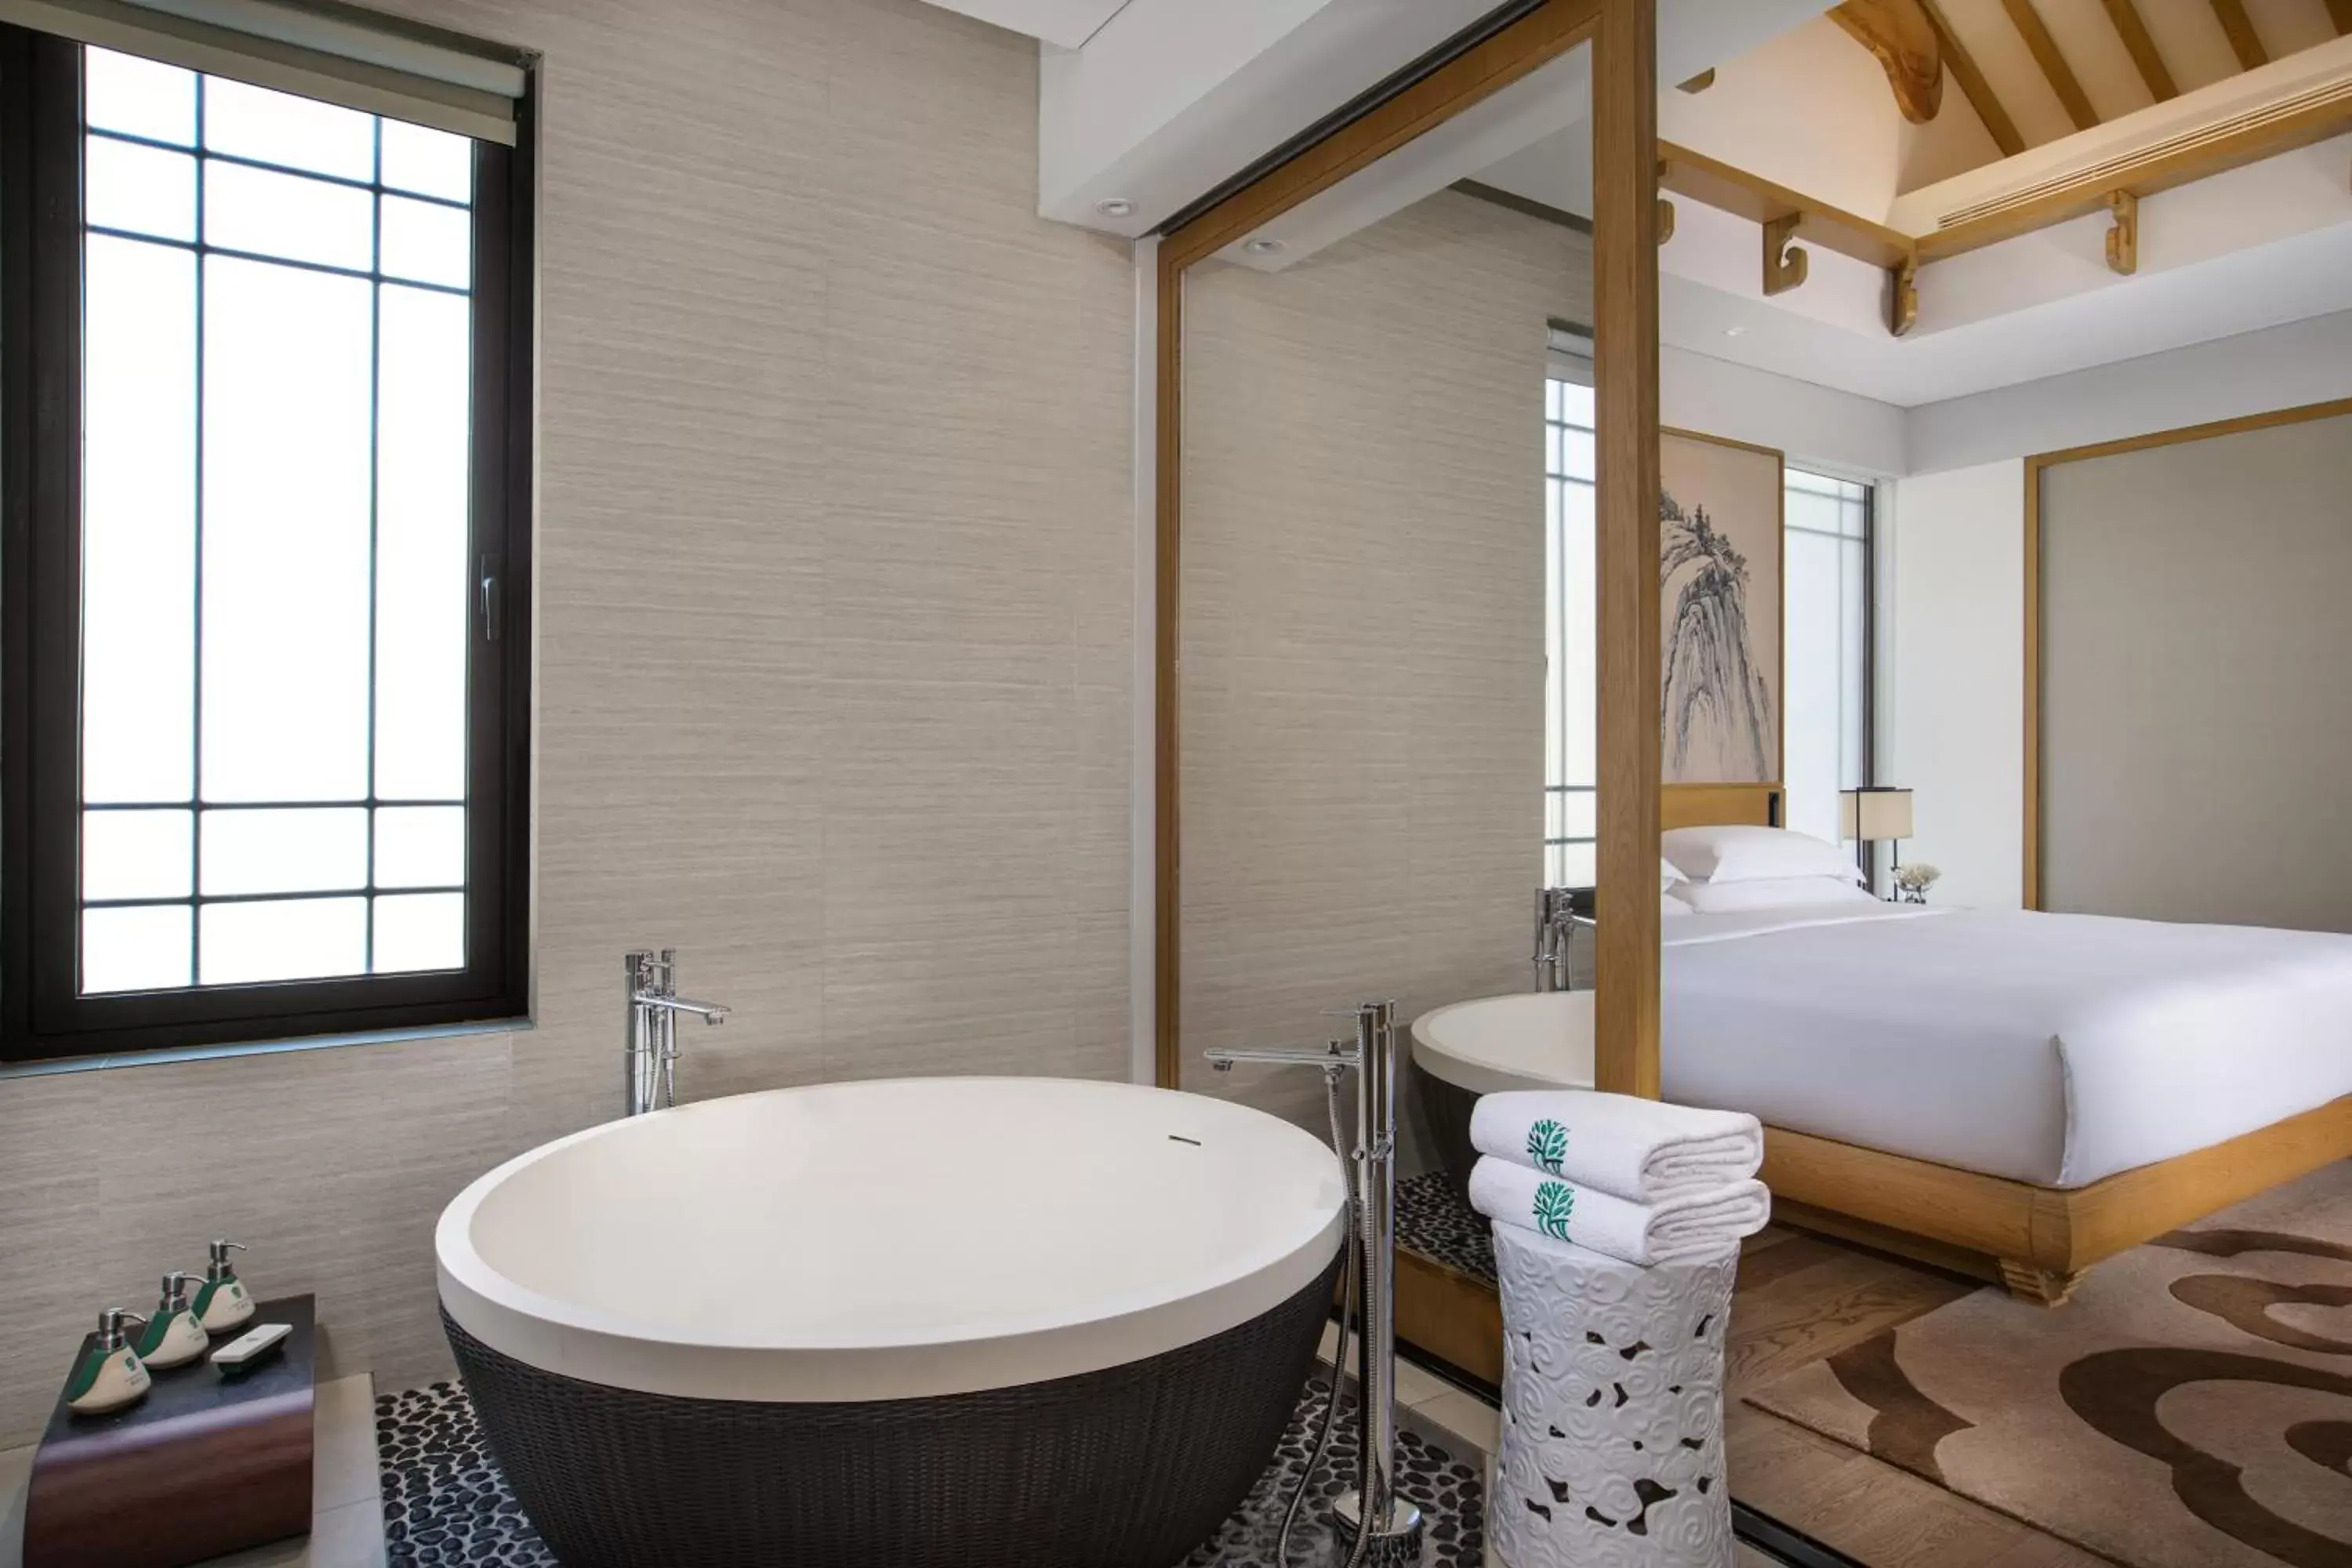 Bathroom in Banyan Tree Hotel Huangshan-The Ancient Charm of Huizhou, a Paradise